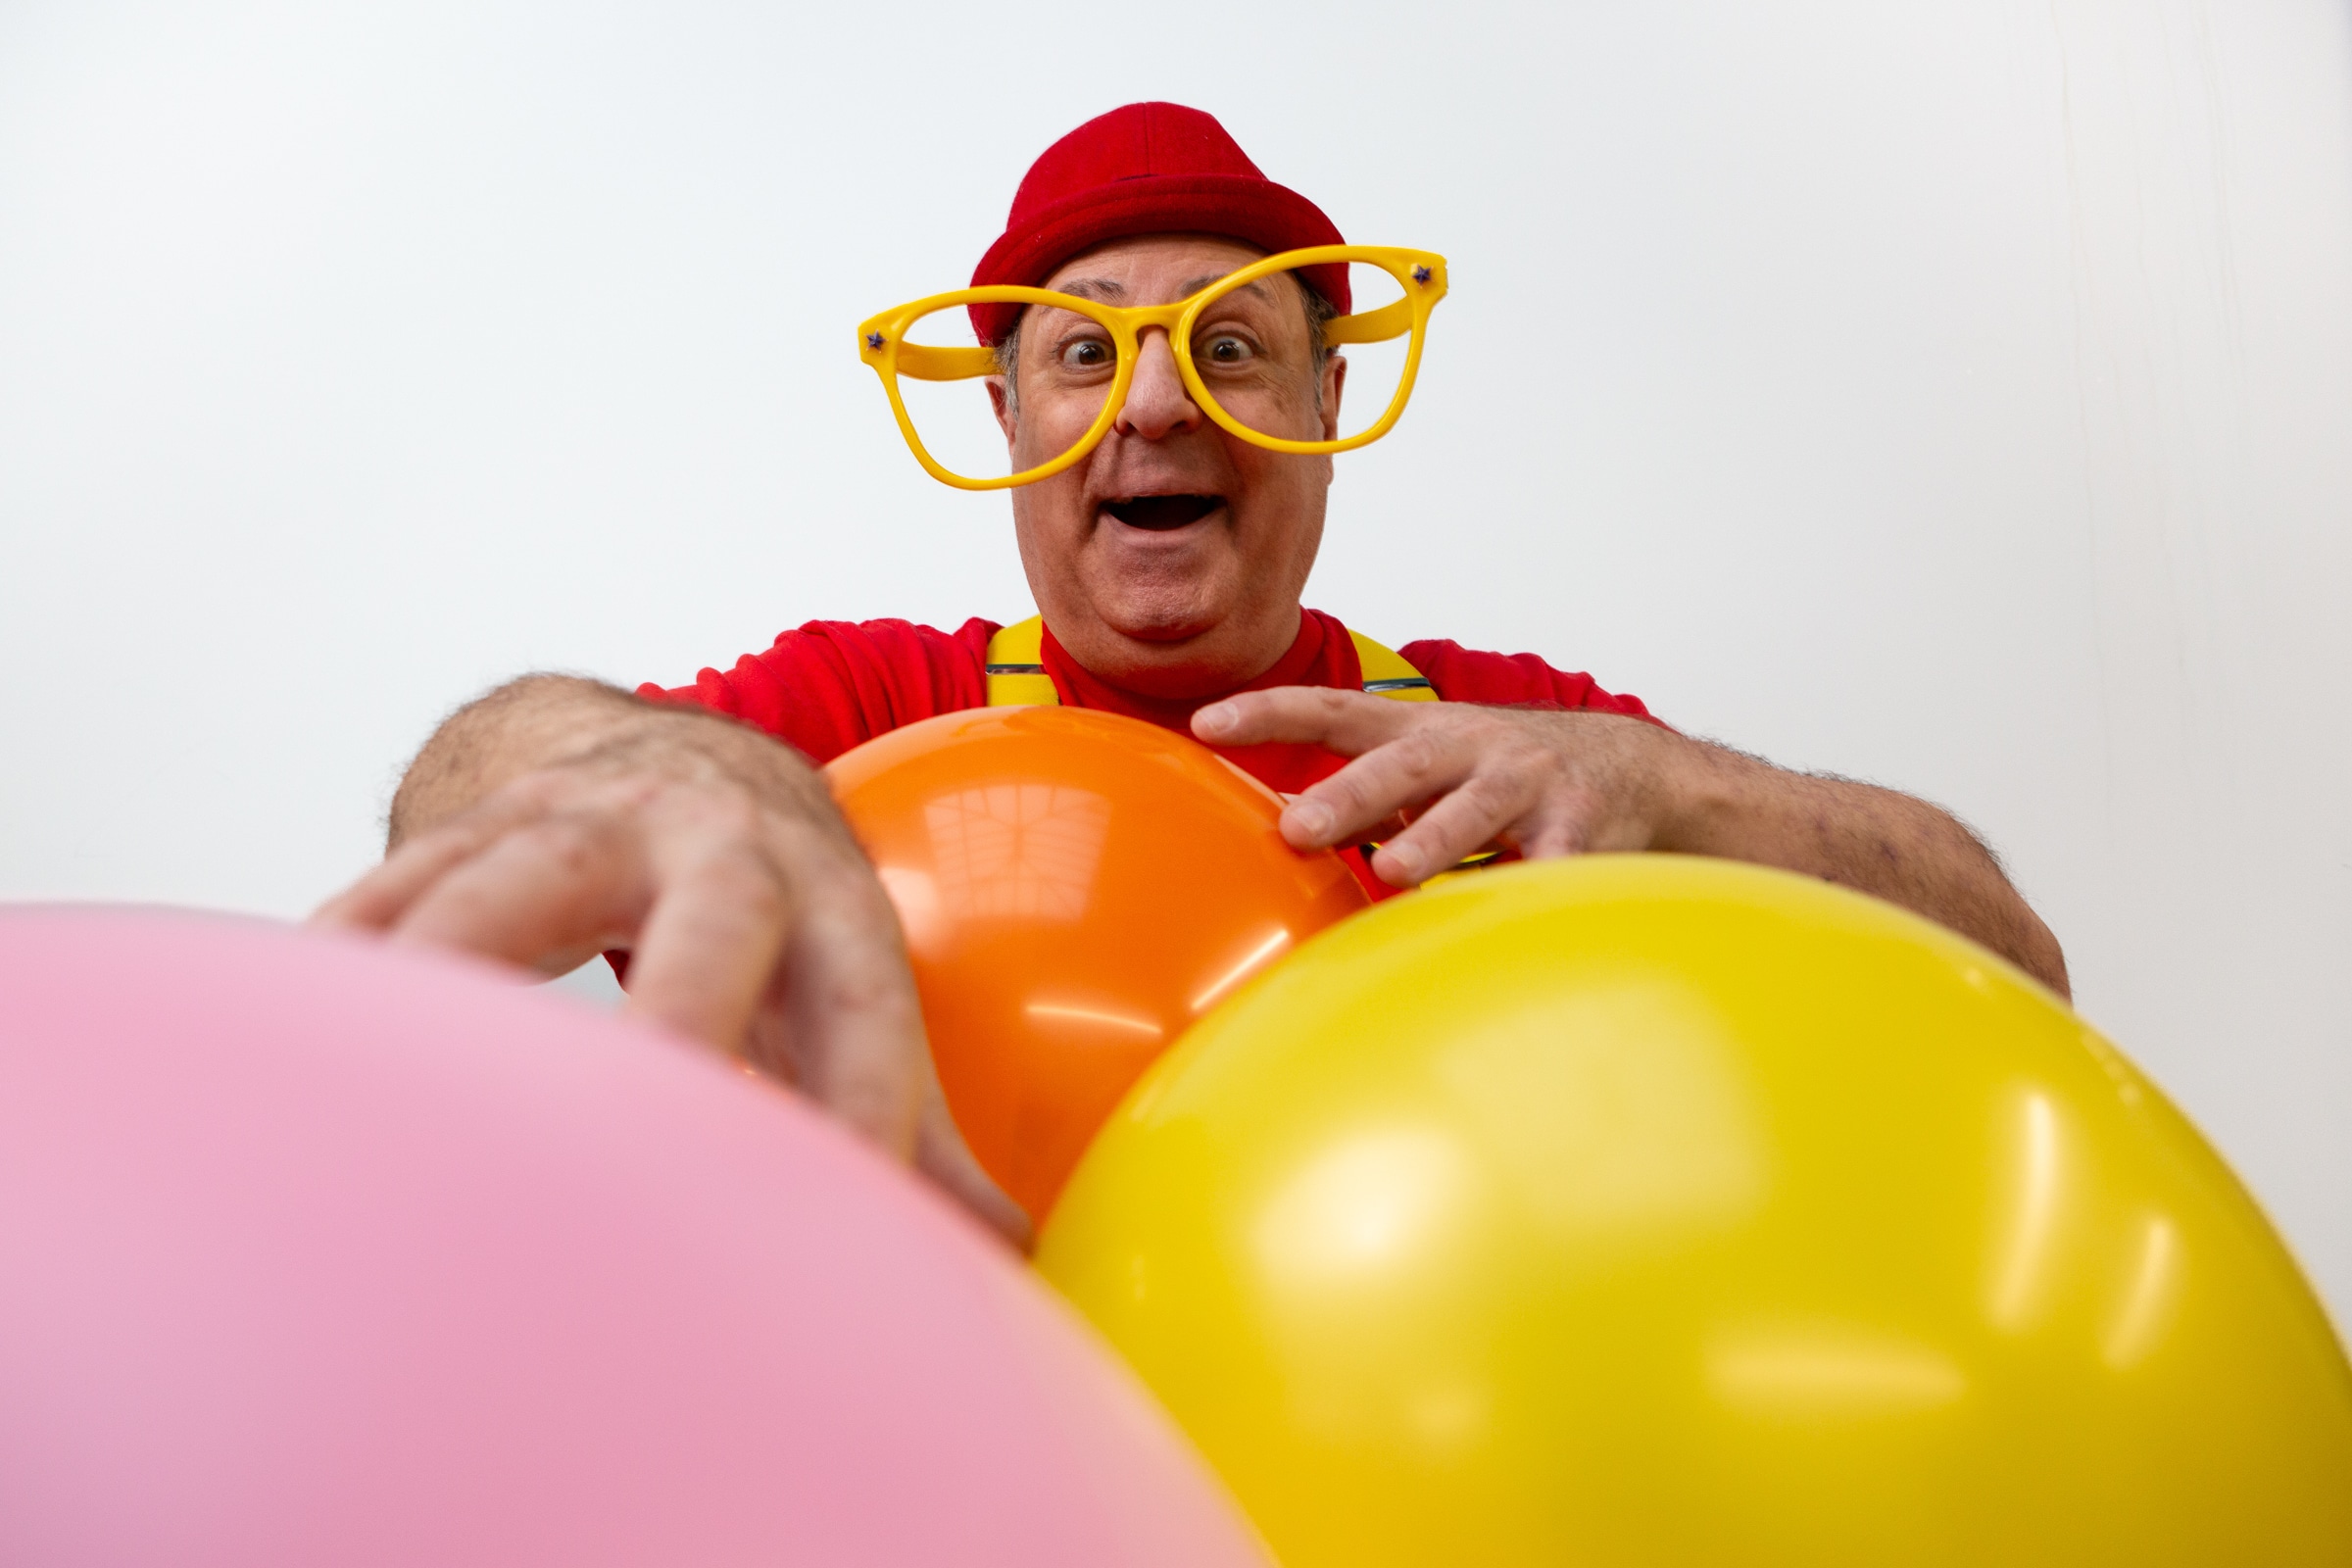 A man with large funny glasses and a red hat holds a pink, orange and yellow balloon.